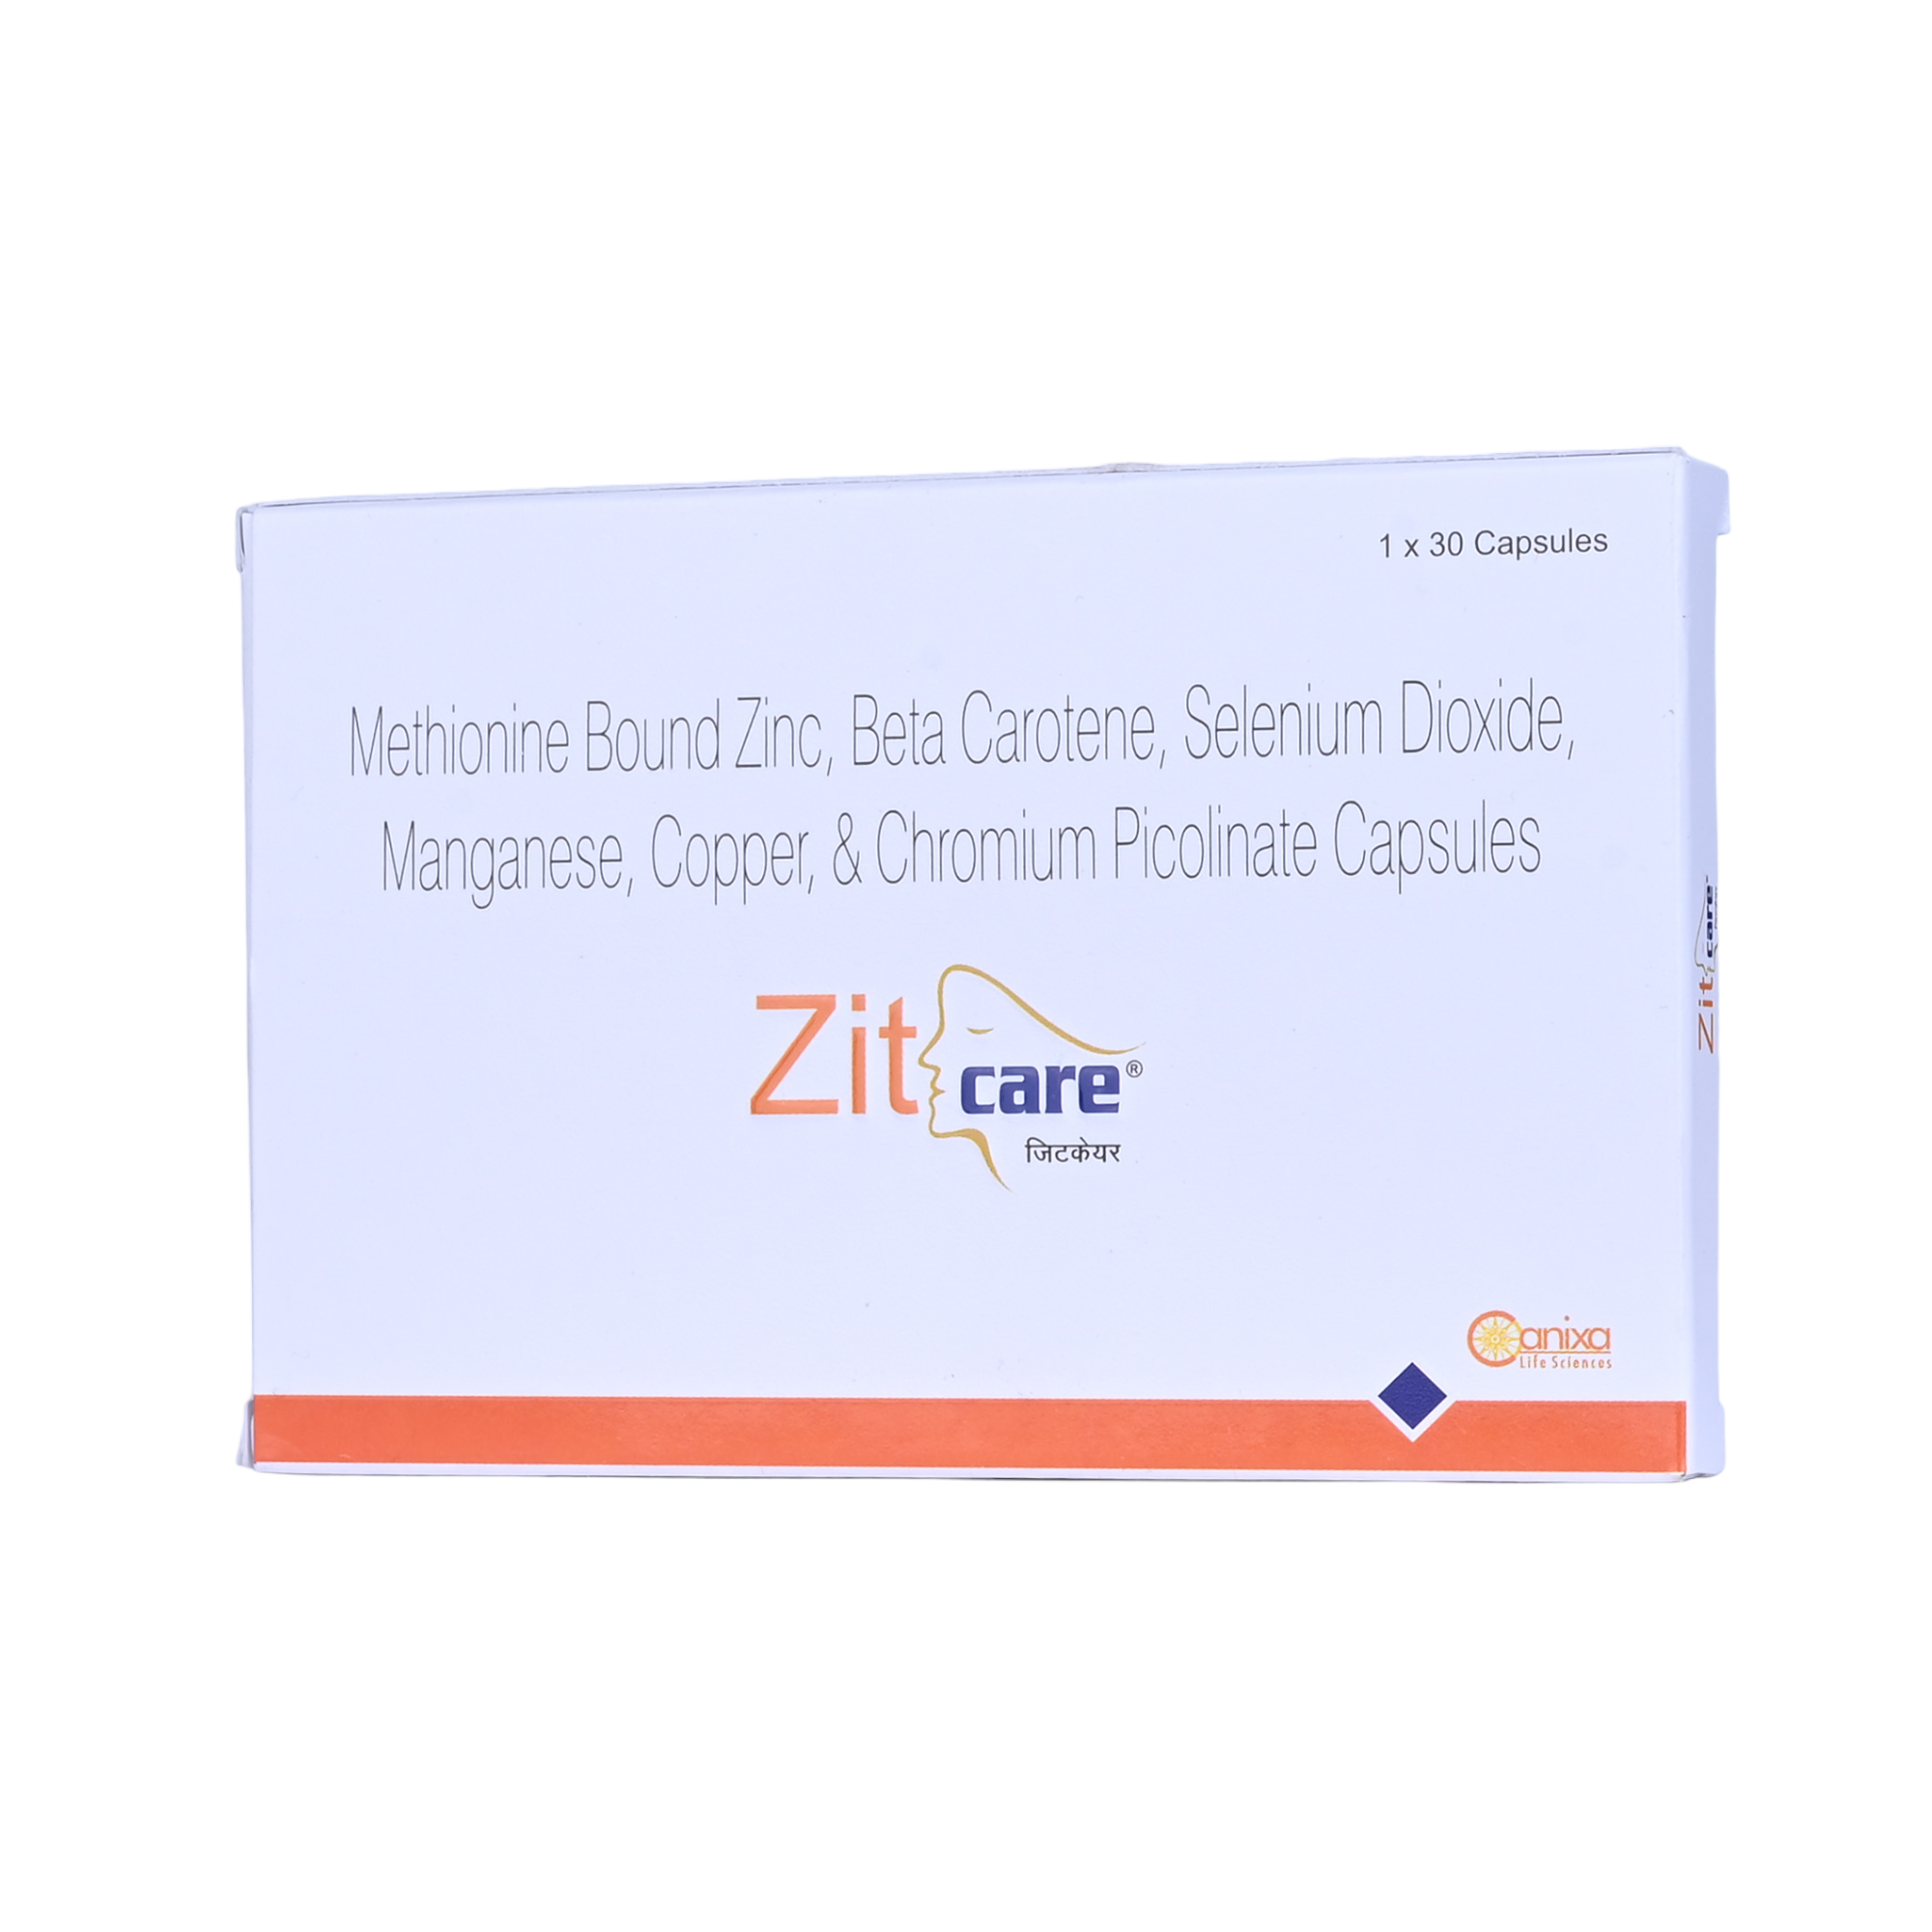 Zit care tablets